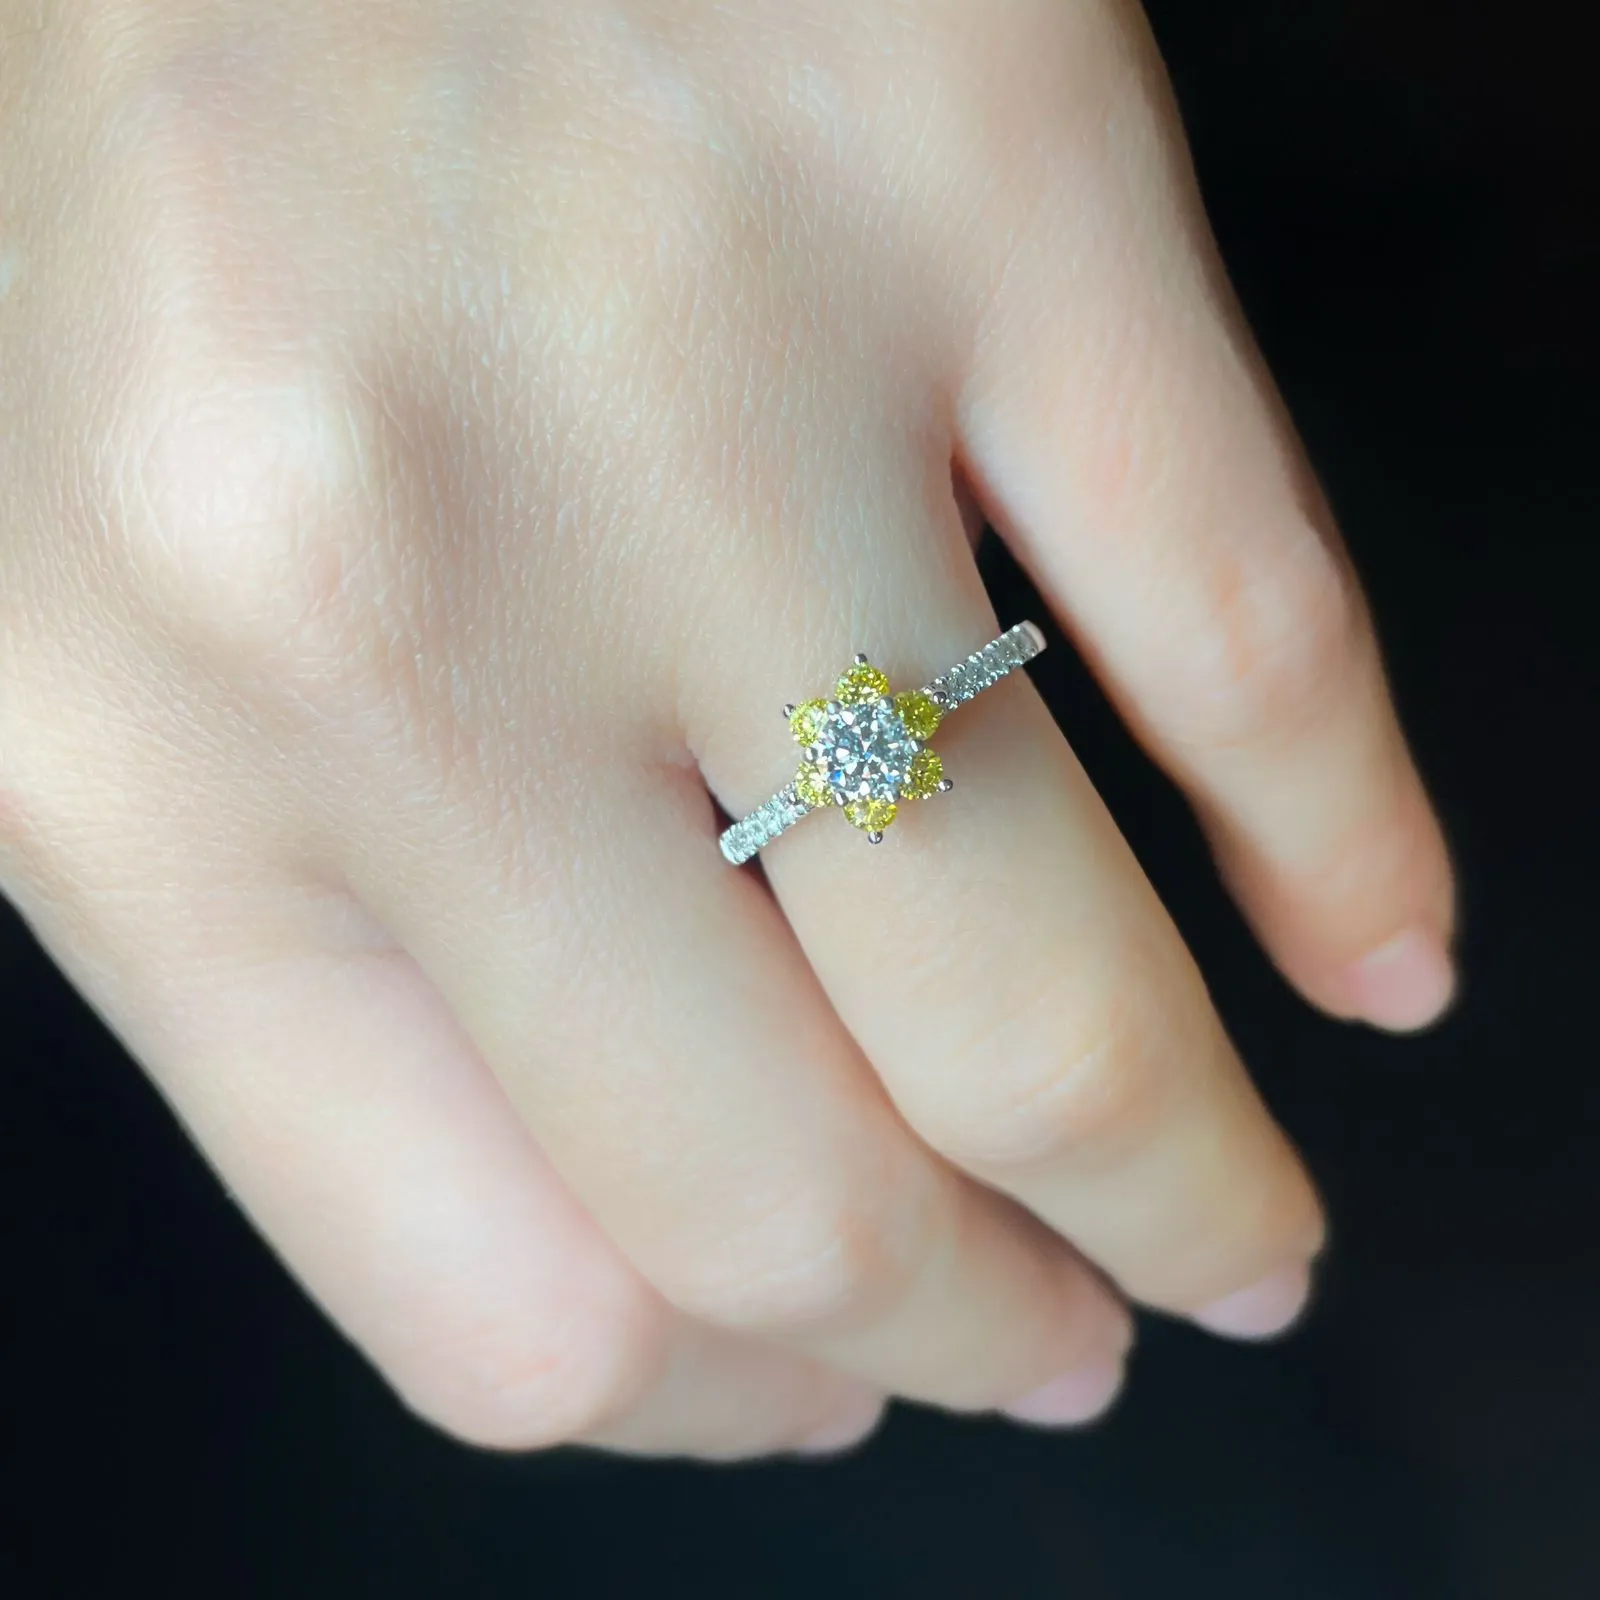 Engagement ring in white gold set with brilliant-cut diamond (0.32 ct, color H, clarity SI1) and Fancy Yellow diamonds.